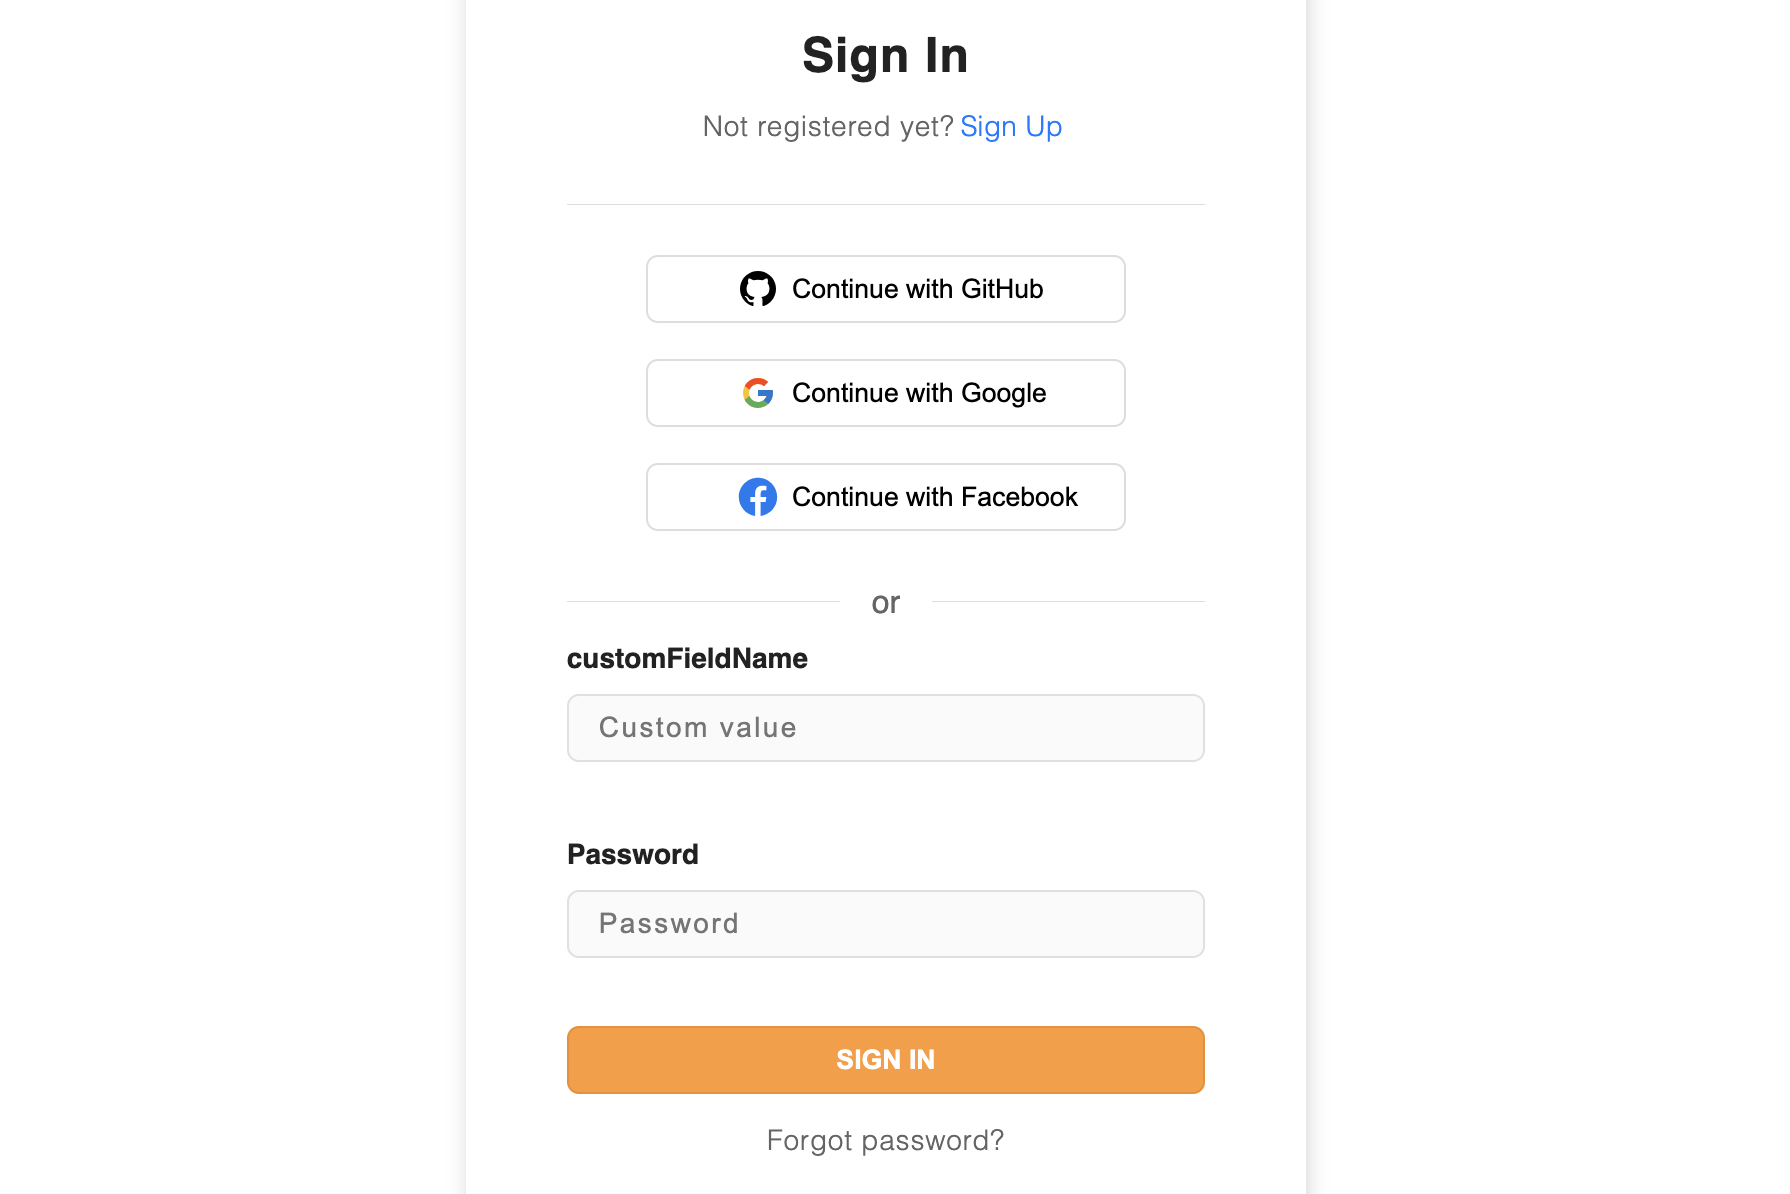 Prebuilt sign up form with custom field label and placeholder